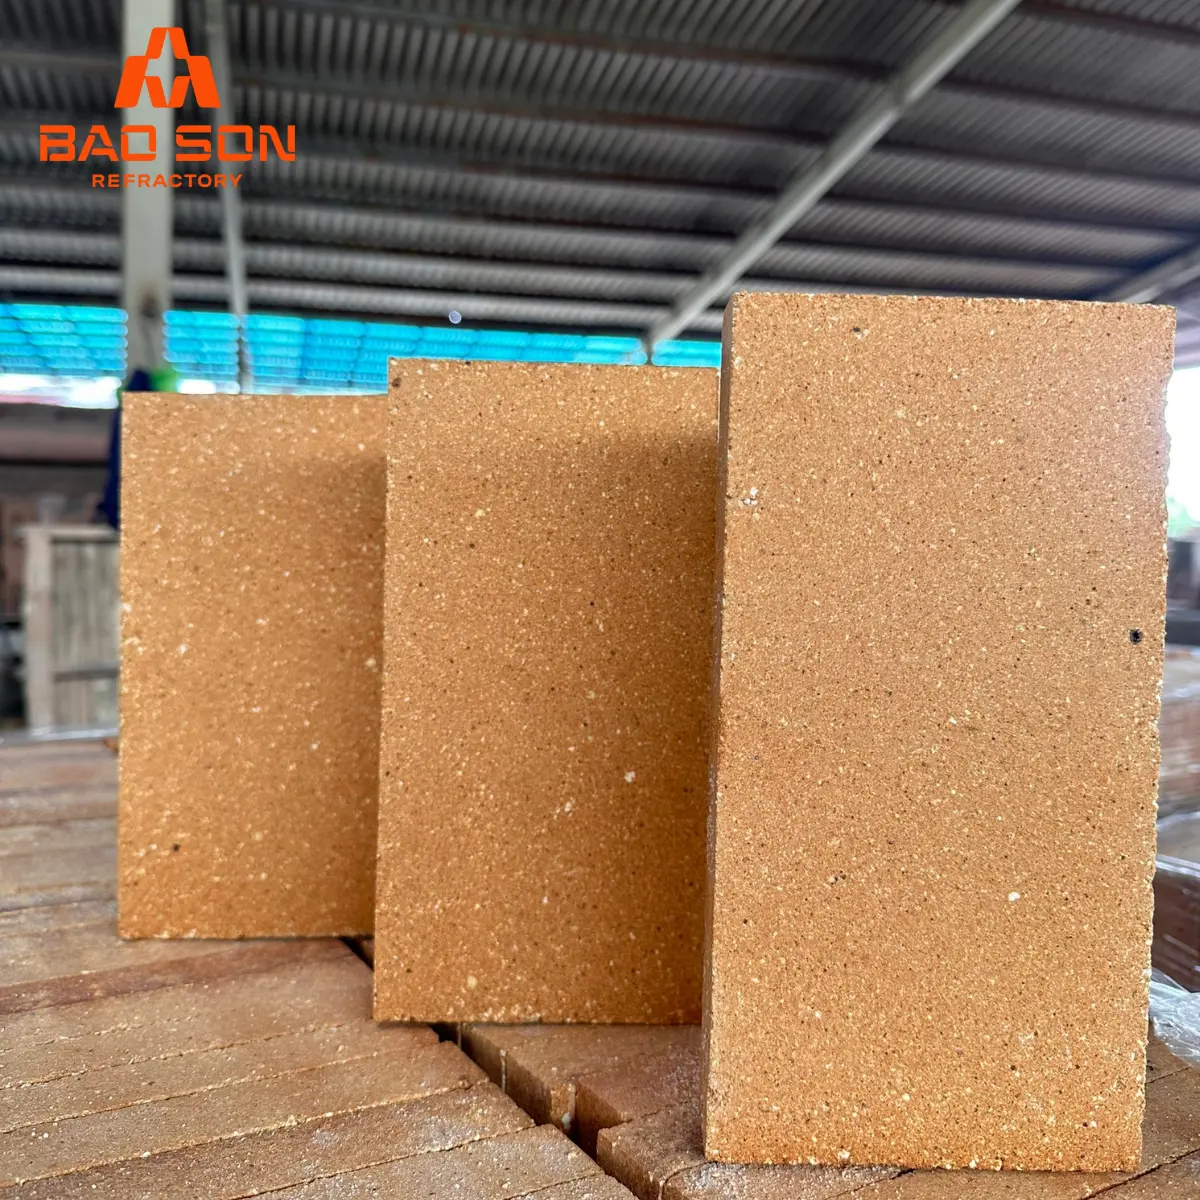 High Quality SK34 SK32 Refractory Bricks Made in Vietnam 1 Year Guarantee Advanced Thermal Protection Bricks by Bao Son